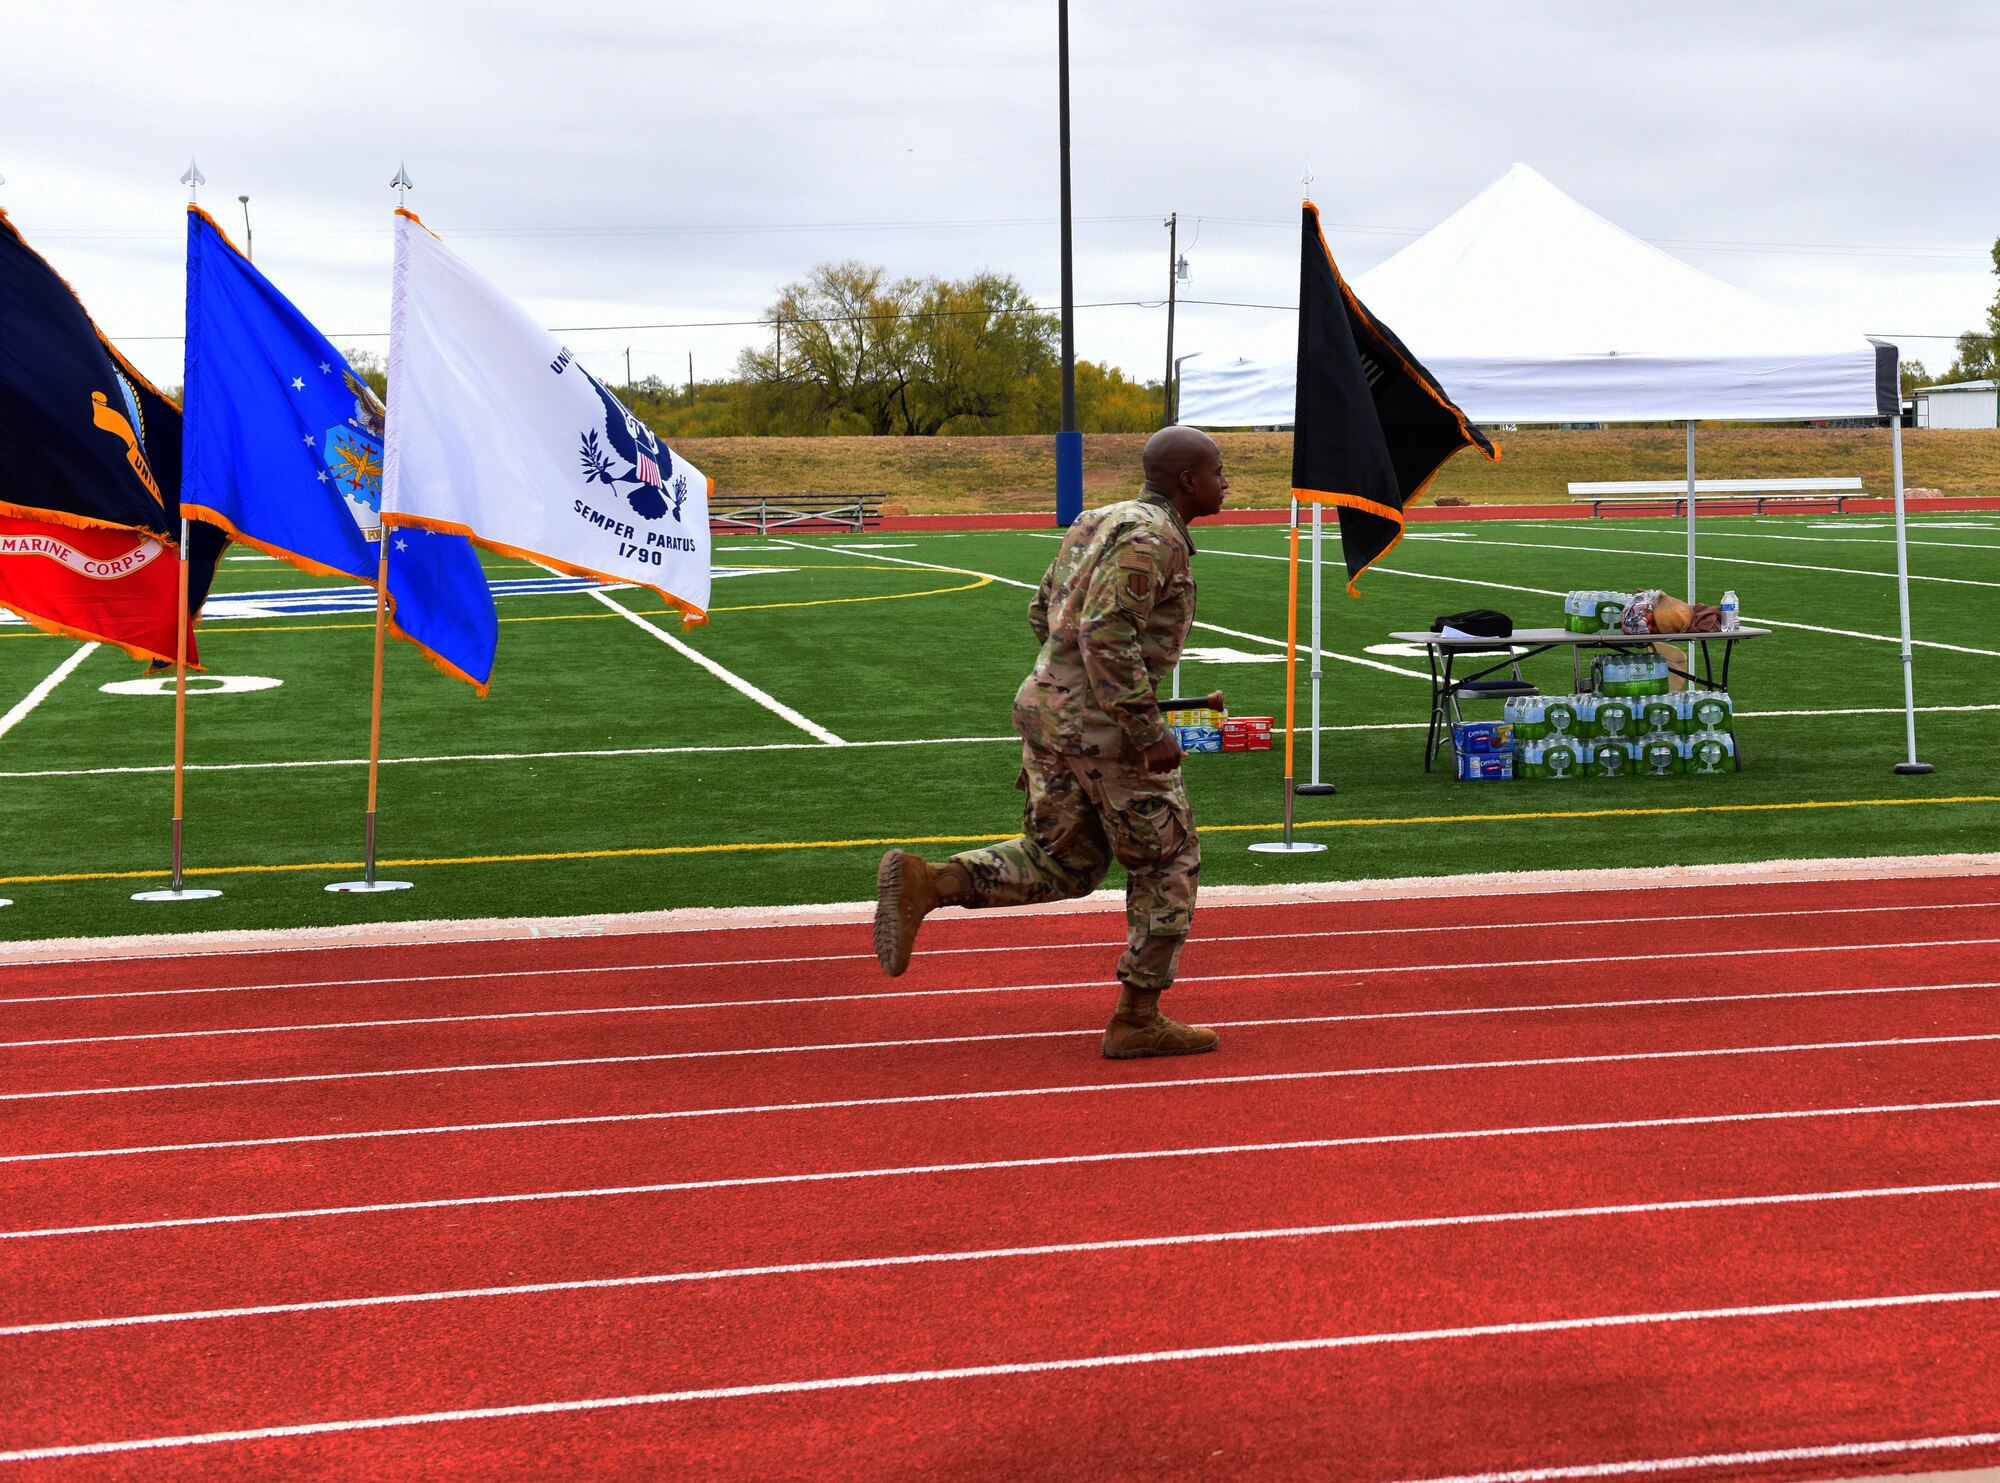 U.S. Air Force Col. James Finlayson, 17th Training Wing vice commander, begins the Prisoner of War and Missing in Action 24 hour remembrance run by making the first lap around the track with the baton. During the run the baton never stopped moving. (U.S. Air Force photo by Airman 1st Class Dominique Parham)